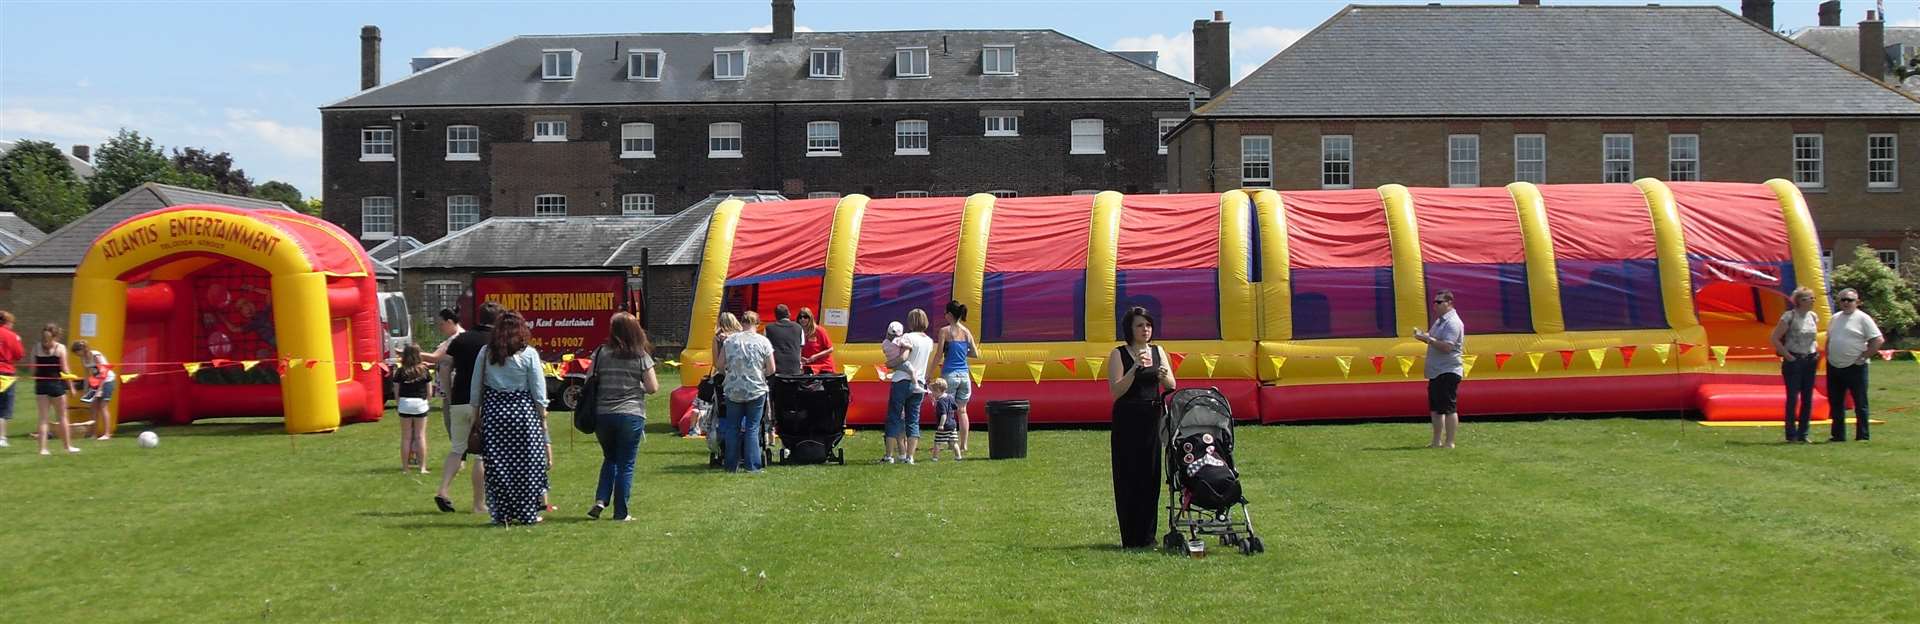 There will be a number of inflatables at the event